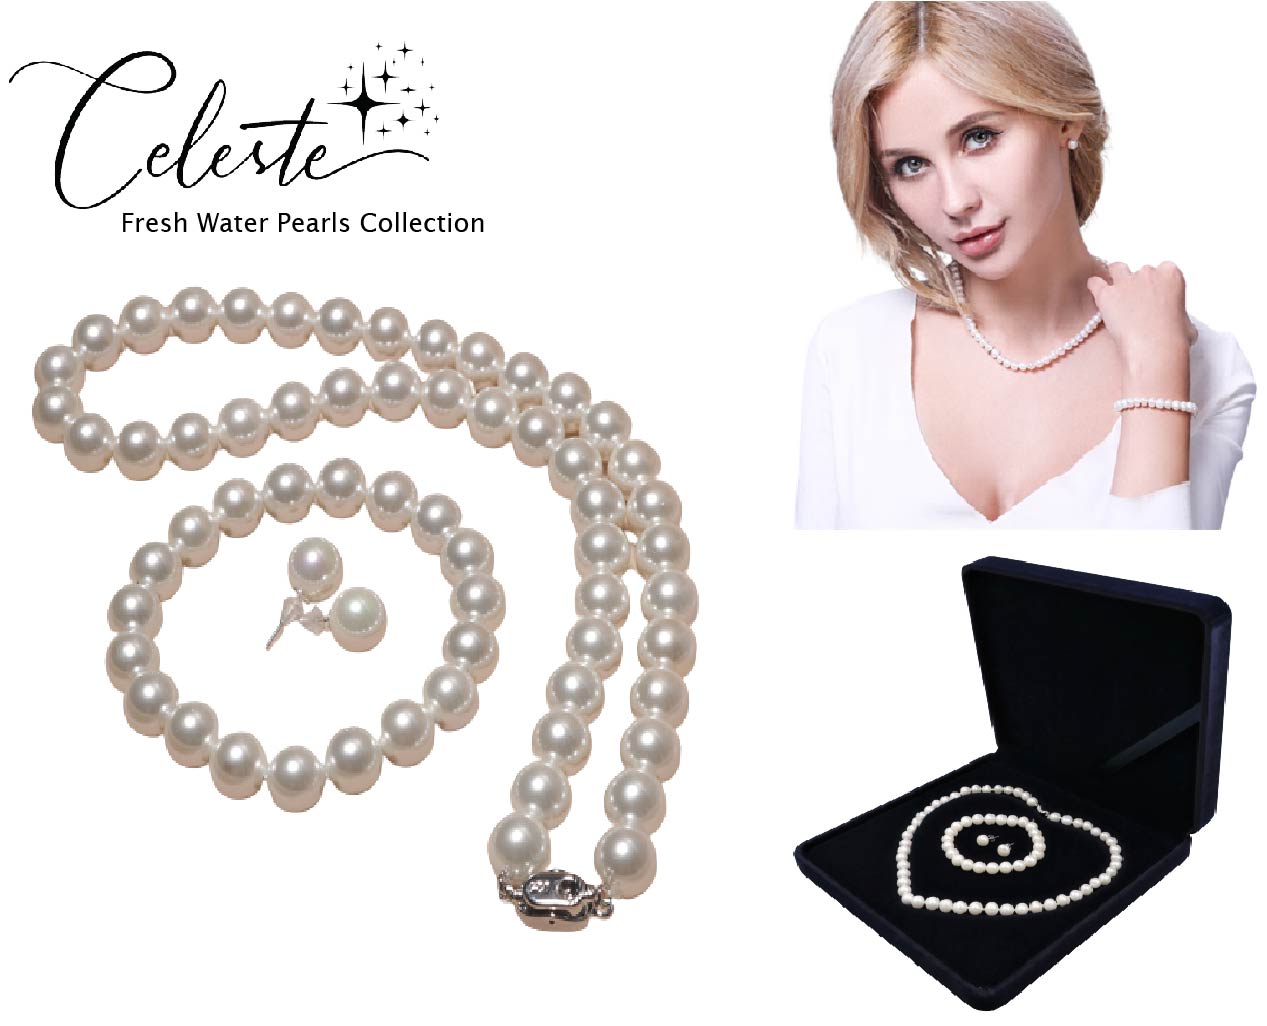 PA - Real Pearl Full Set Fresh Water Pearls Necklace Bracelet Earring Celeste 925 Sterling Silver White Round Pearls gift box